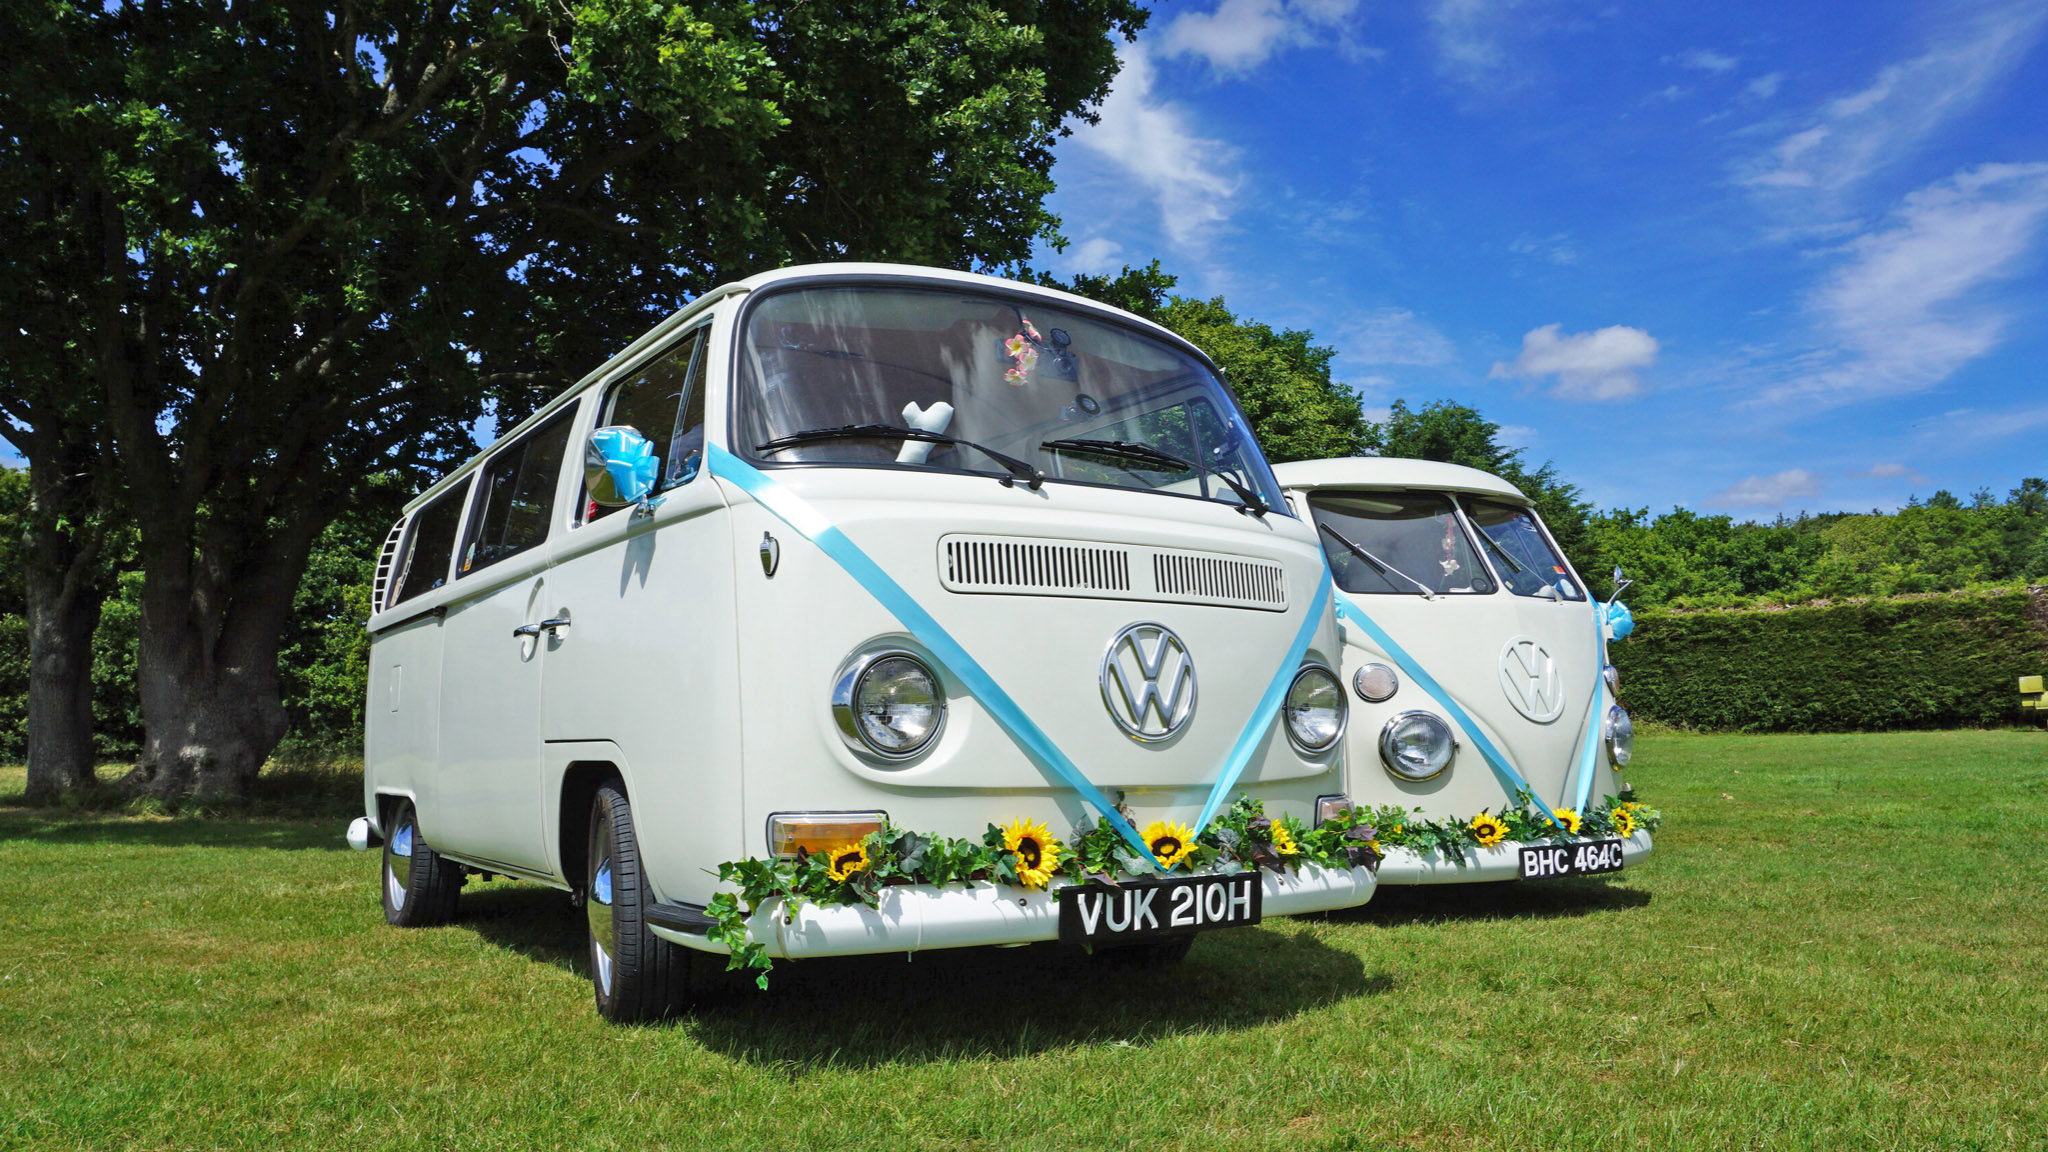 Two Matching VolksWagen Campervans in White decorated with Light Blue Ribbons across the front and some floral arrangement on its front bumper. Both Retro vehicles are side-by-side in the Garden of East Quay Wedding Venue in Kent.